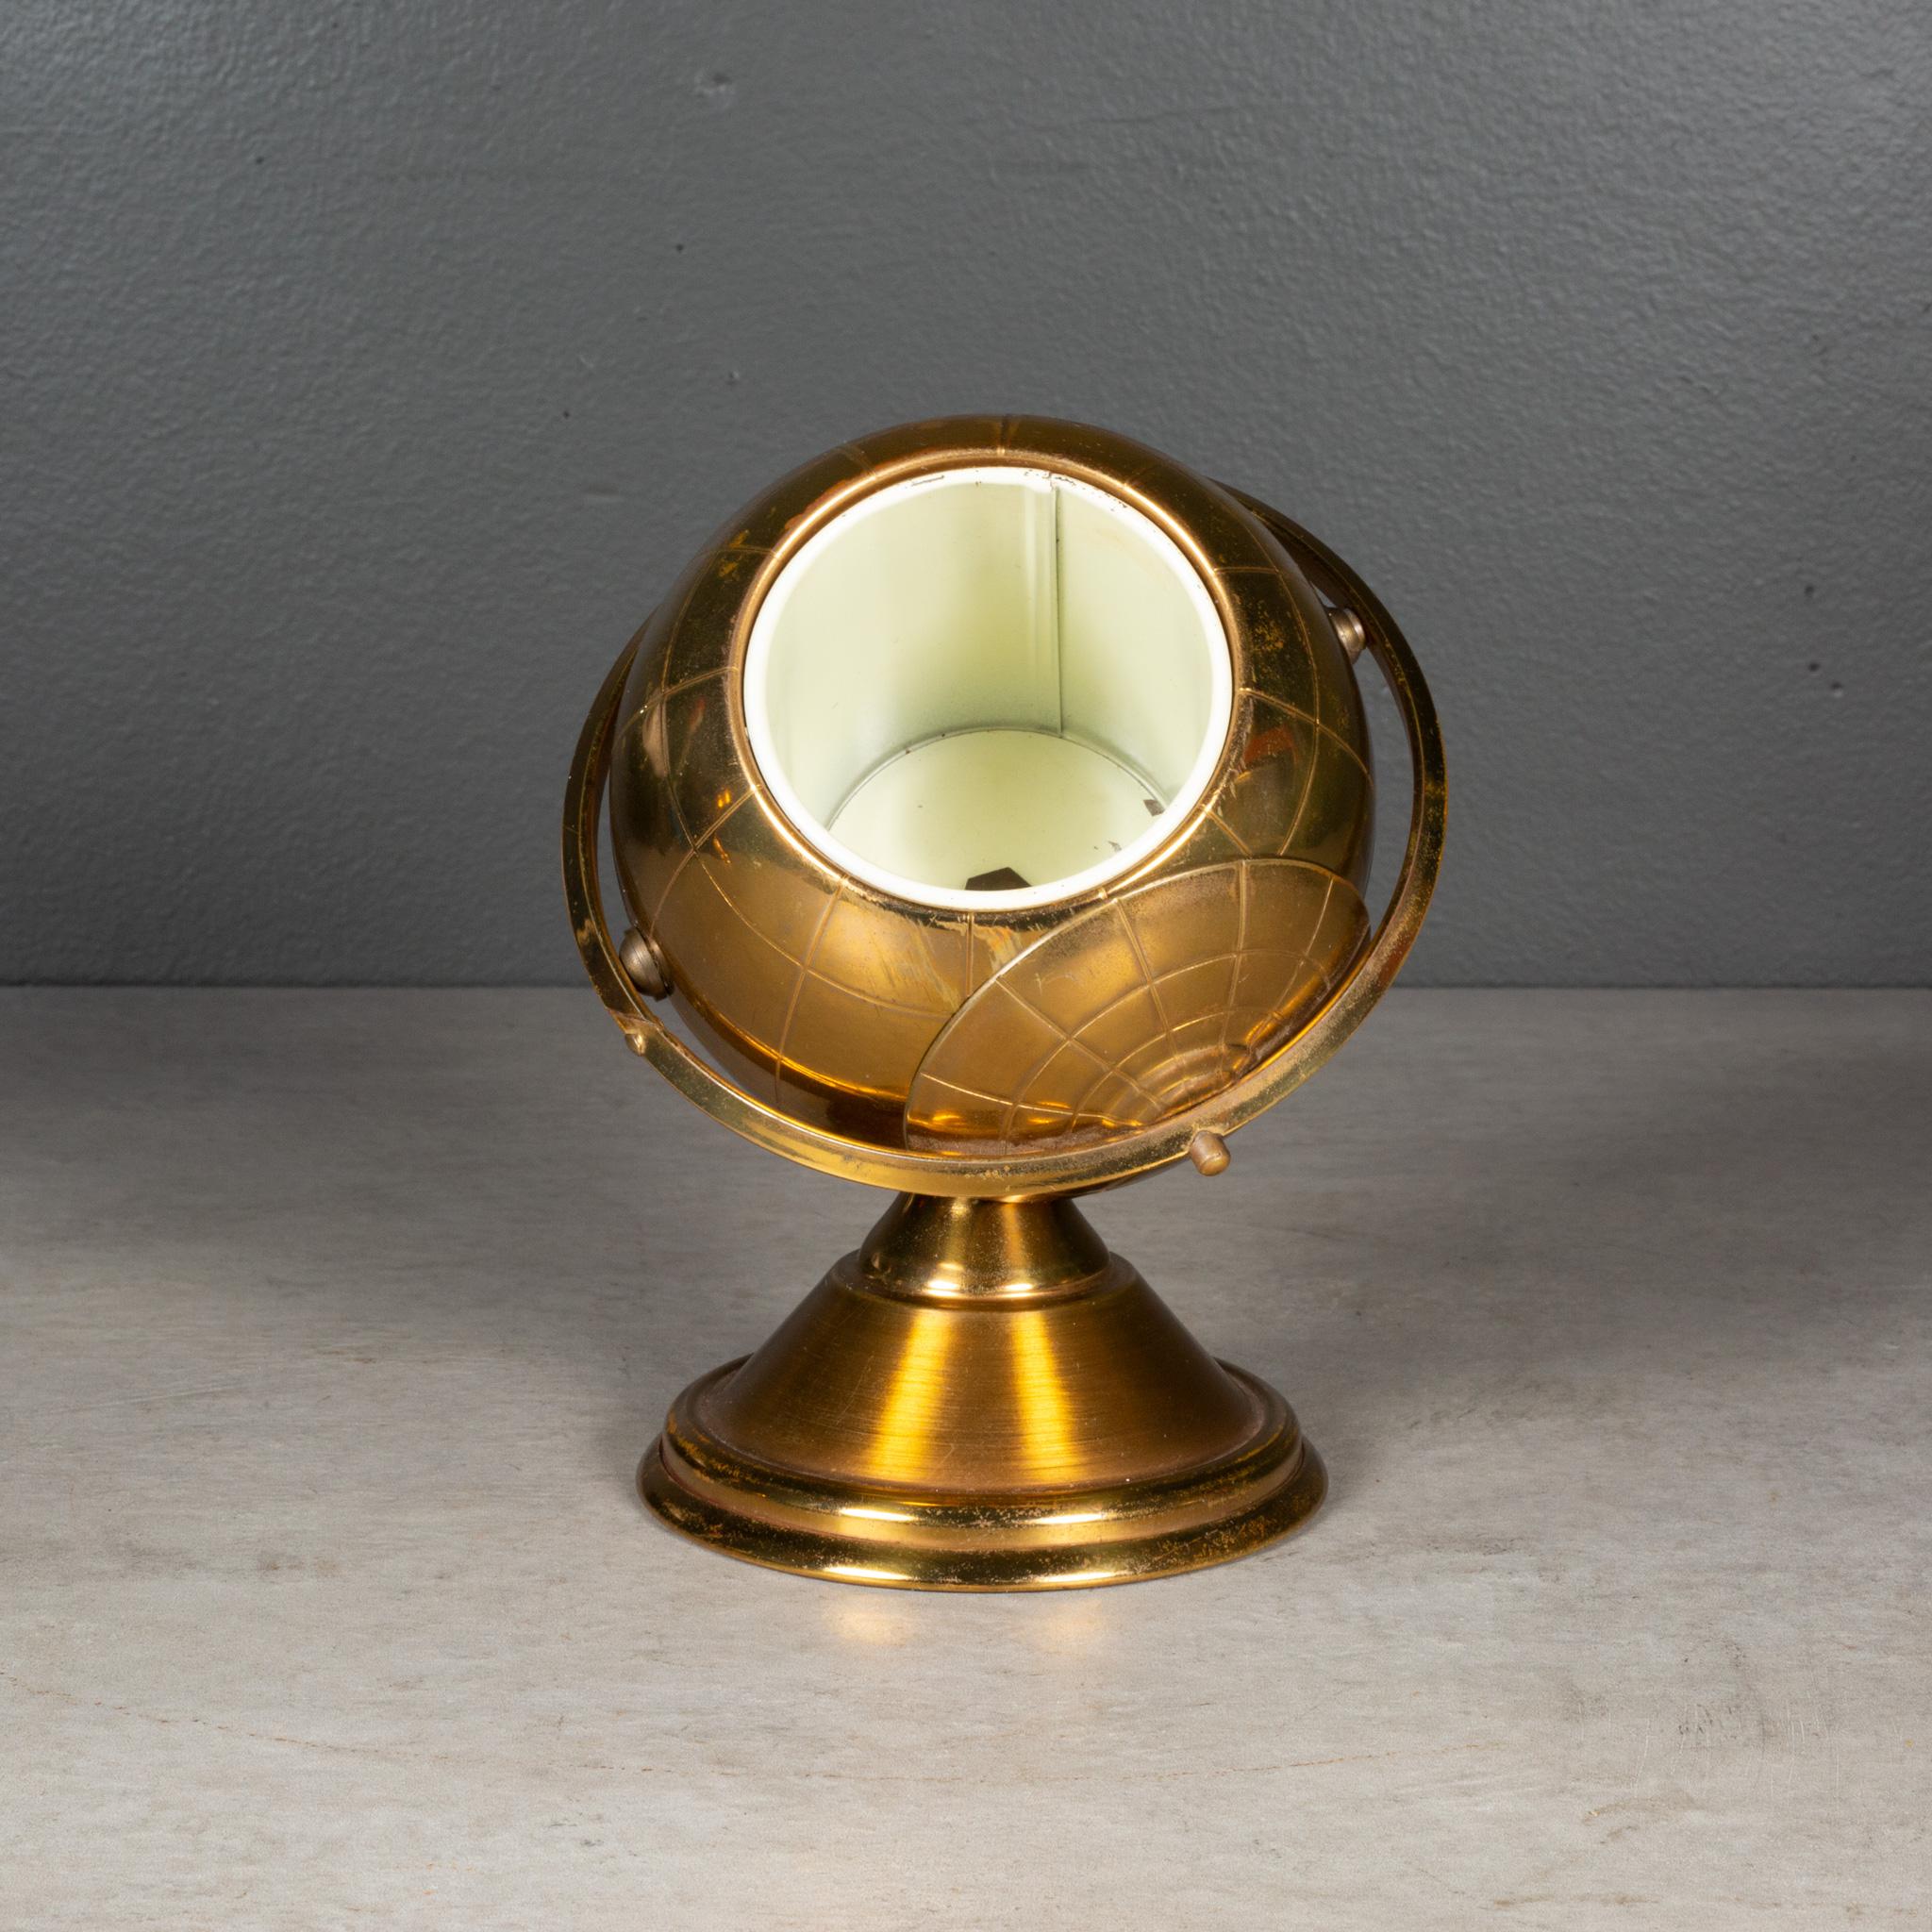 ABOUT 

An original mid-century brass cigarette holder. The lid slides open on the globe's axis to reveal a metal interior designed to hold cigarettes. This piece has retained its original finish and has the appropriate finish for the age and use.

